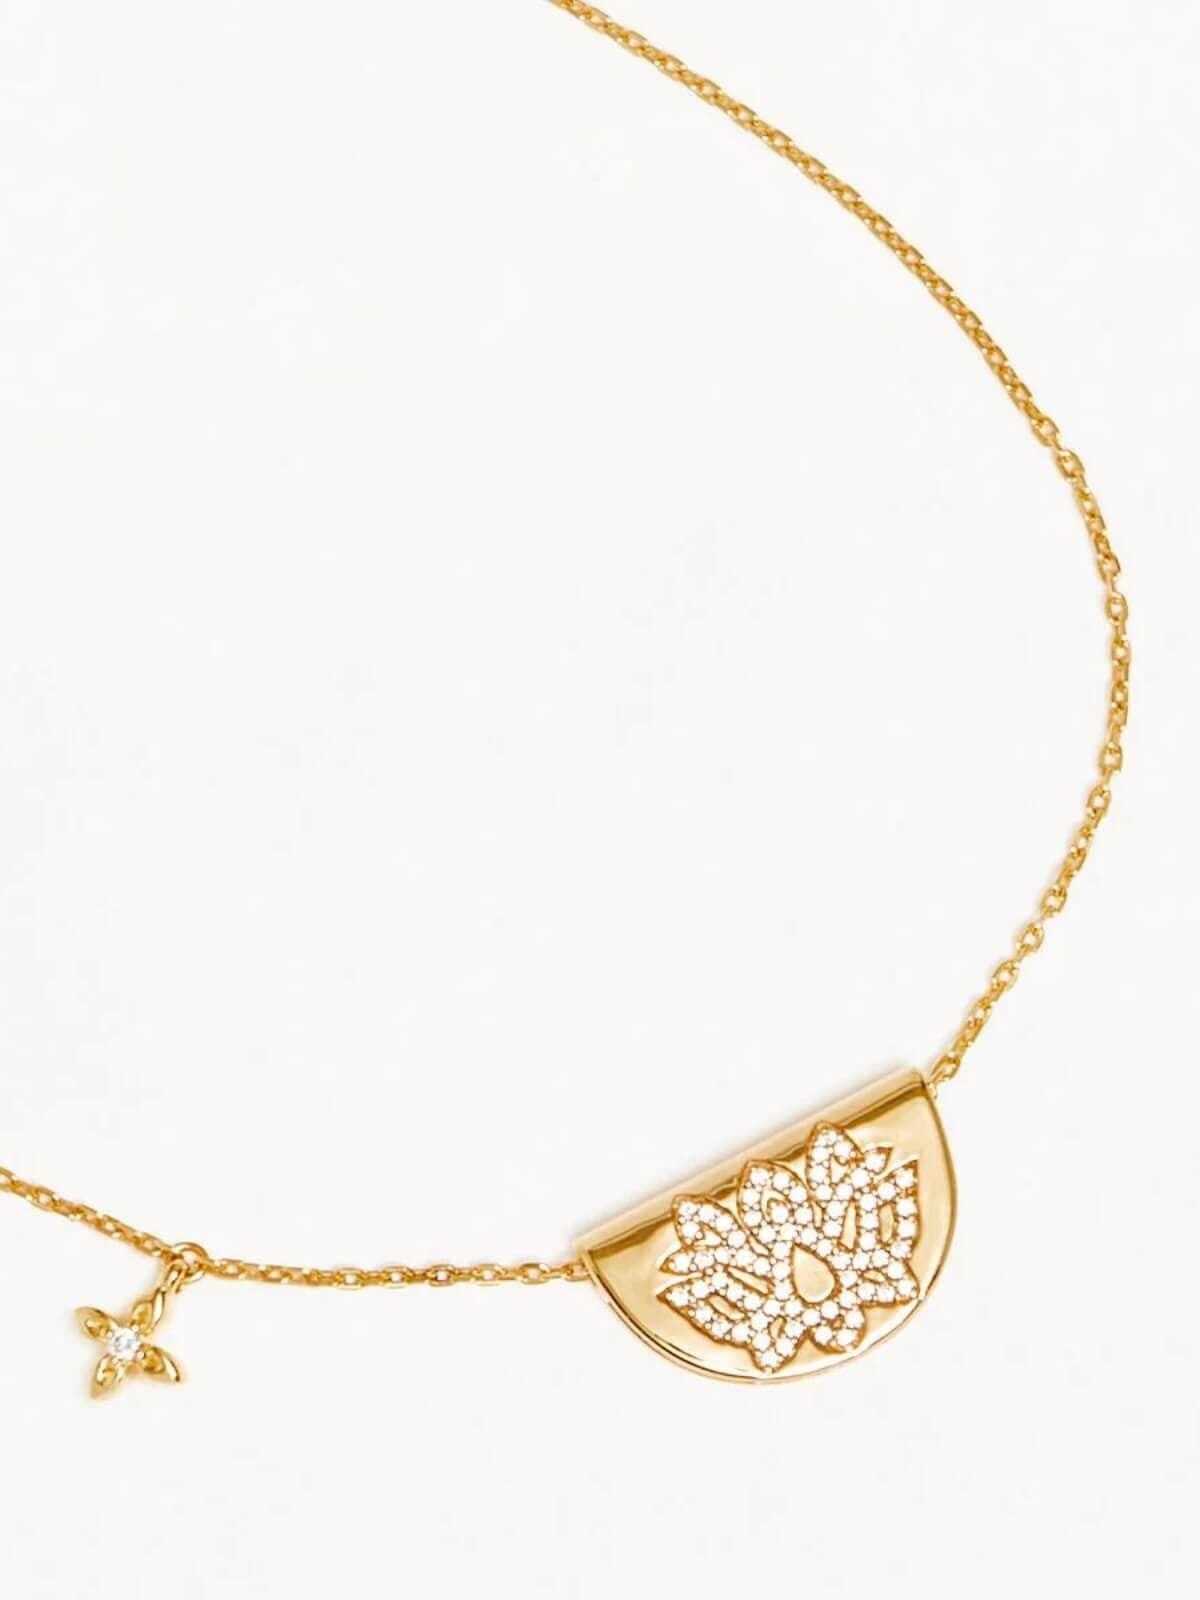 By Charlotte | Live In Light Lotus Necklace - Gold | Perlu